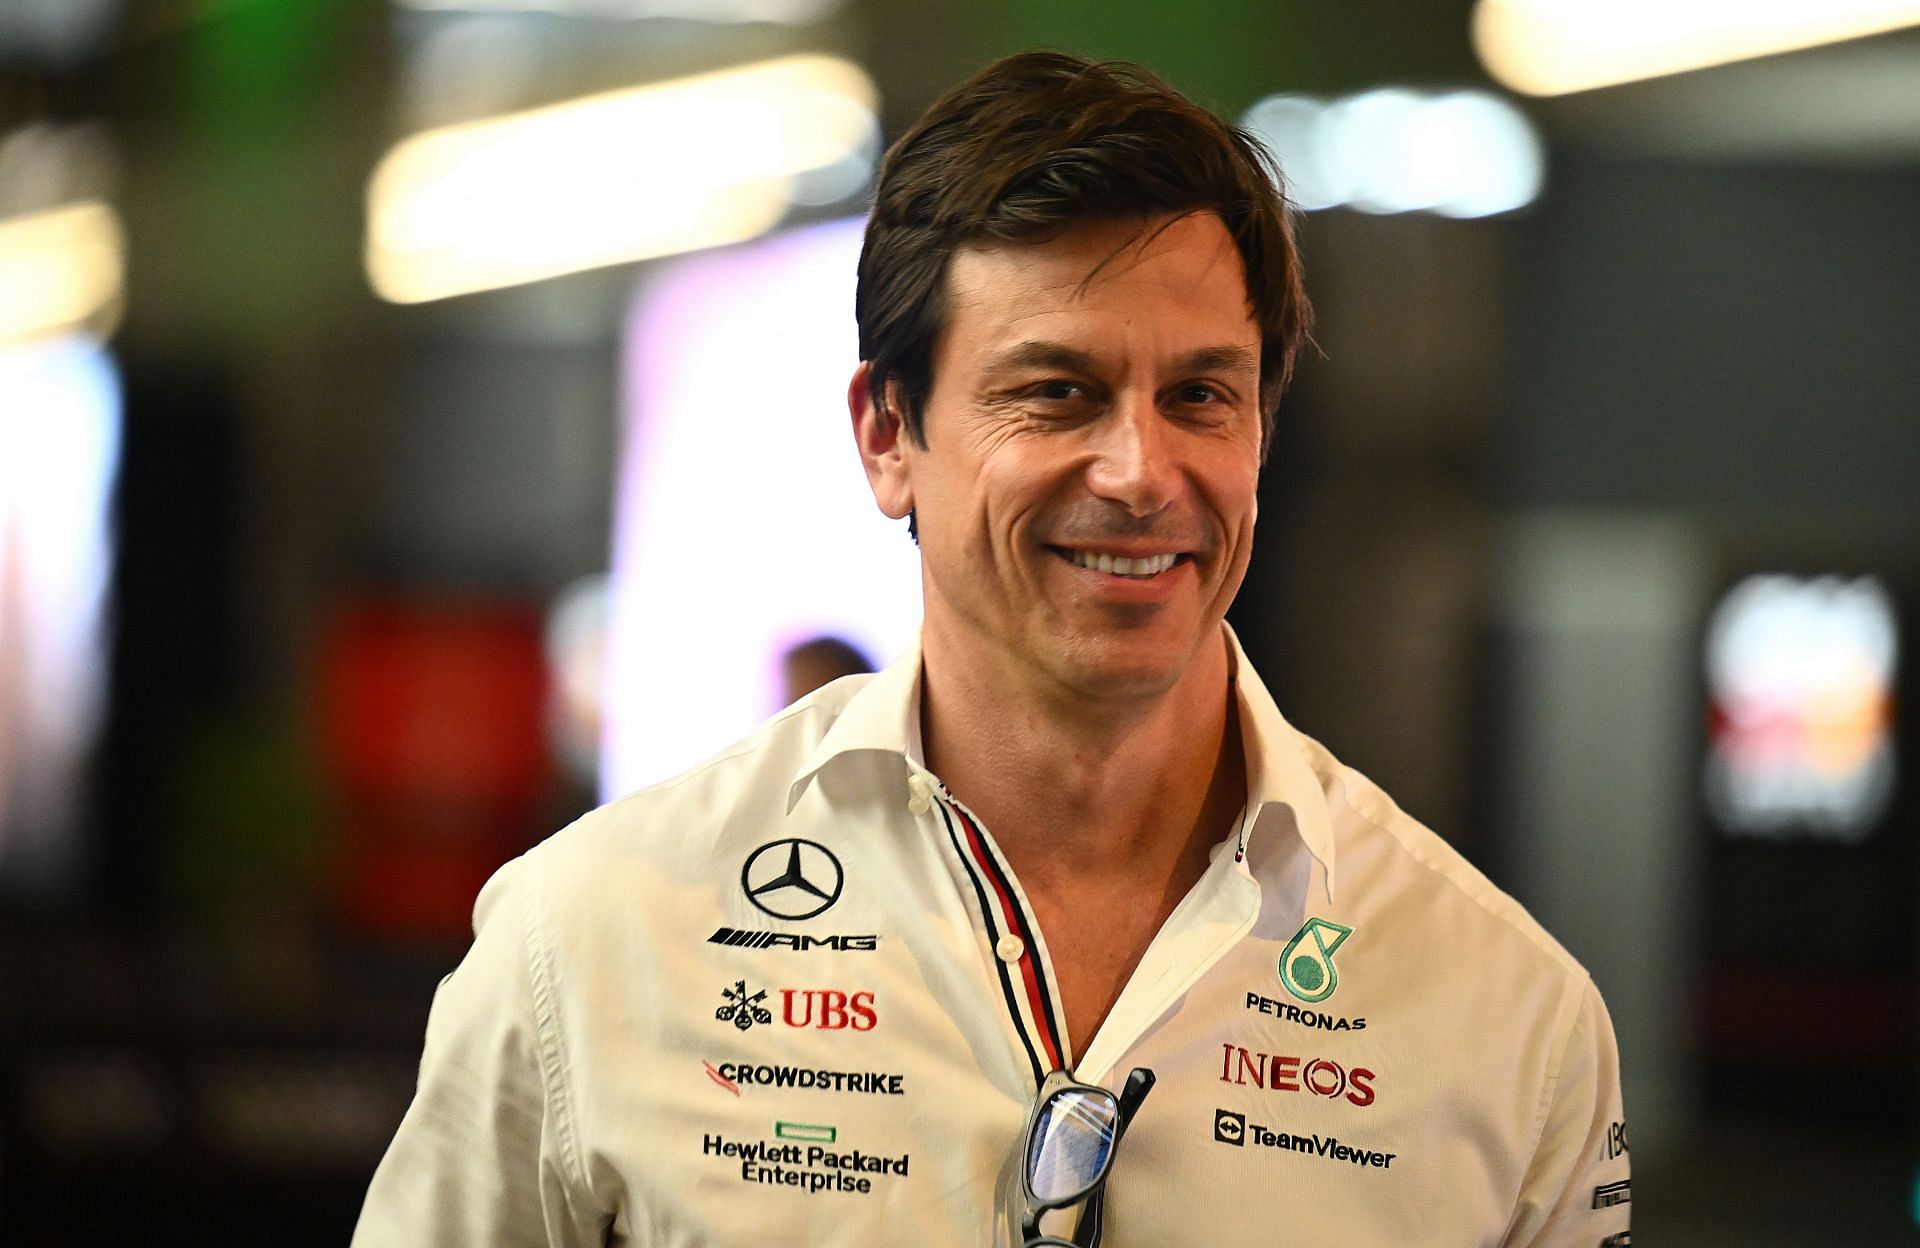 Mercedes Team Principal Toto Wolff leaves the paddock after the drivers and team principals met after practice ahead of the F1 Grand Prix of Saudi Arabia at the Jeddah Corniche Circuit on March 25, 2022 in Jeddah, Saudi Arabia. (Photo by Clive Mason/Getty Images)